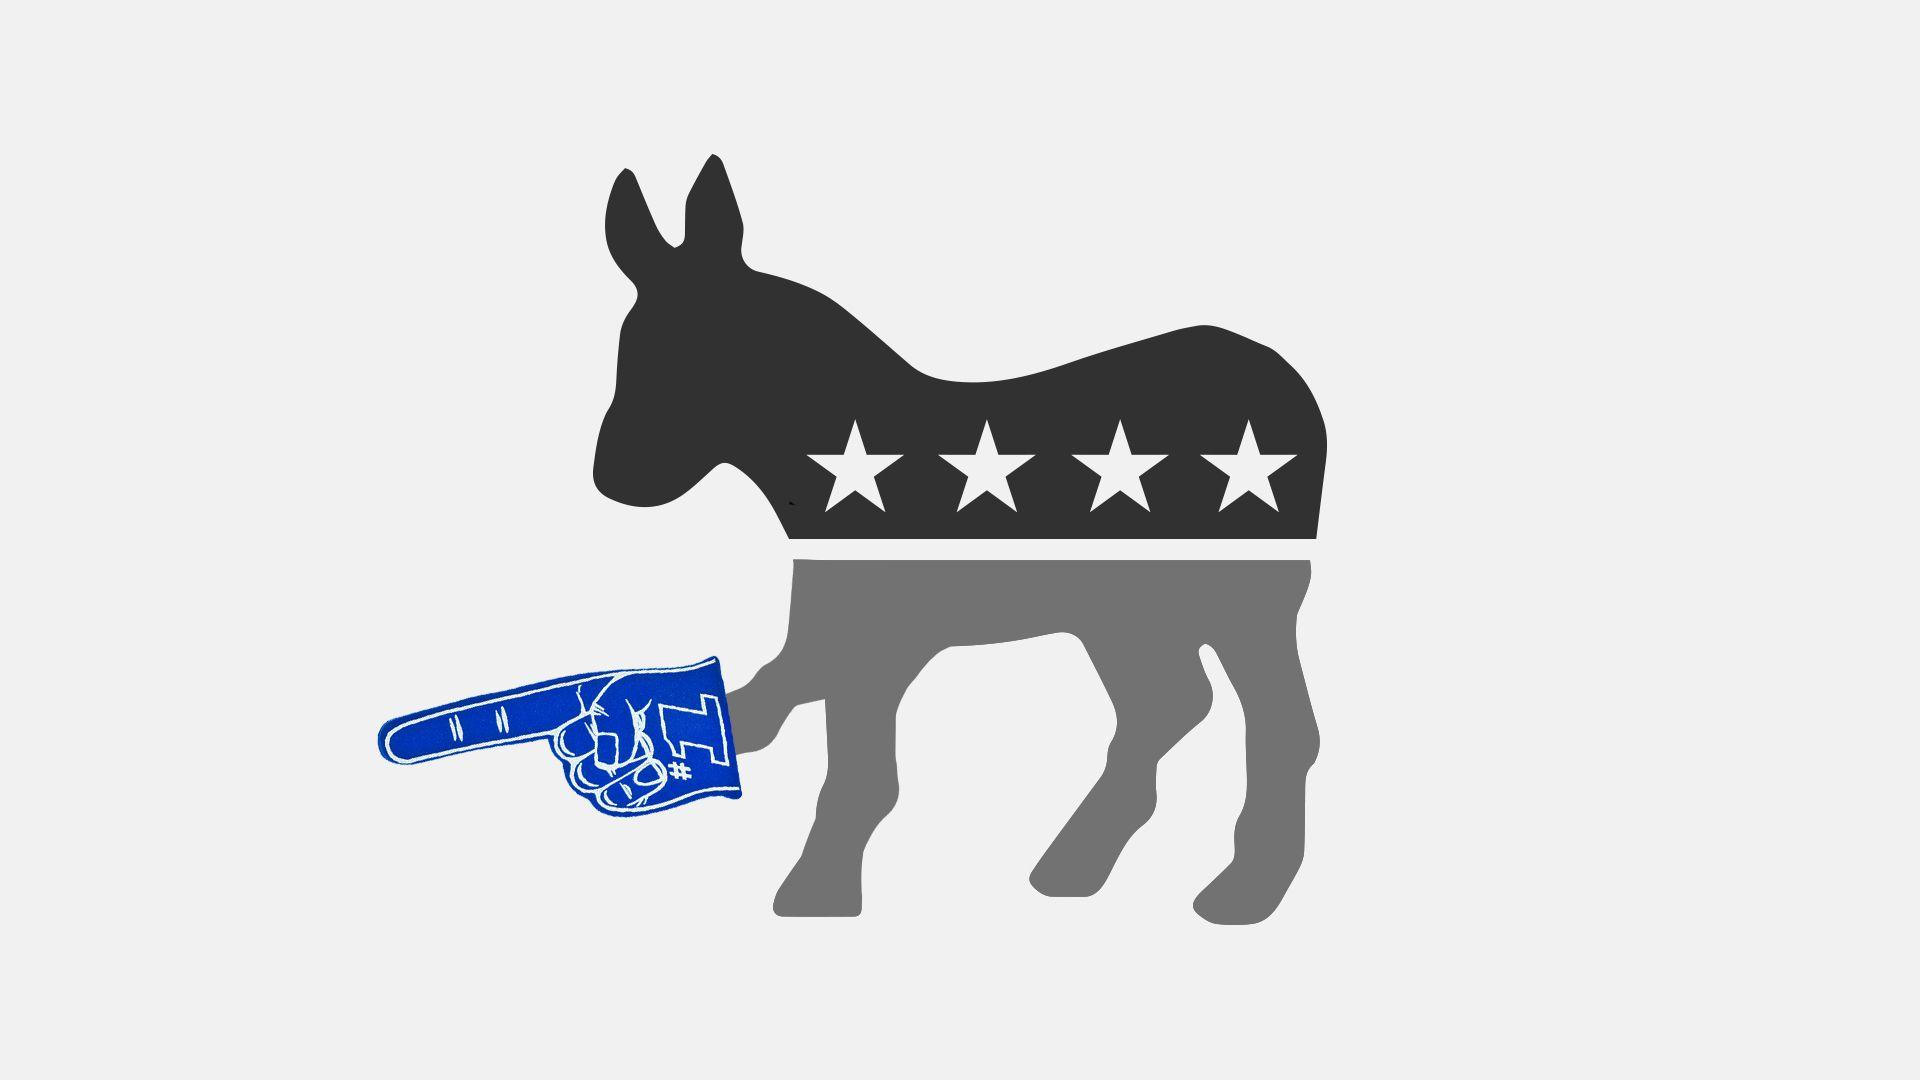 Democrats: The 1 big thing to know about every